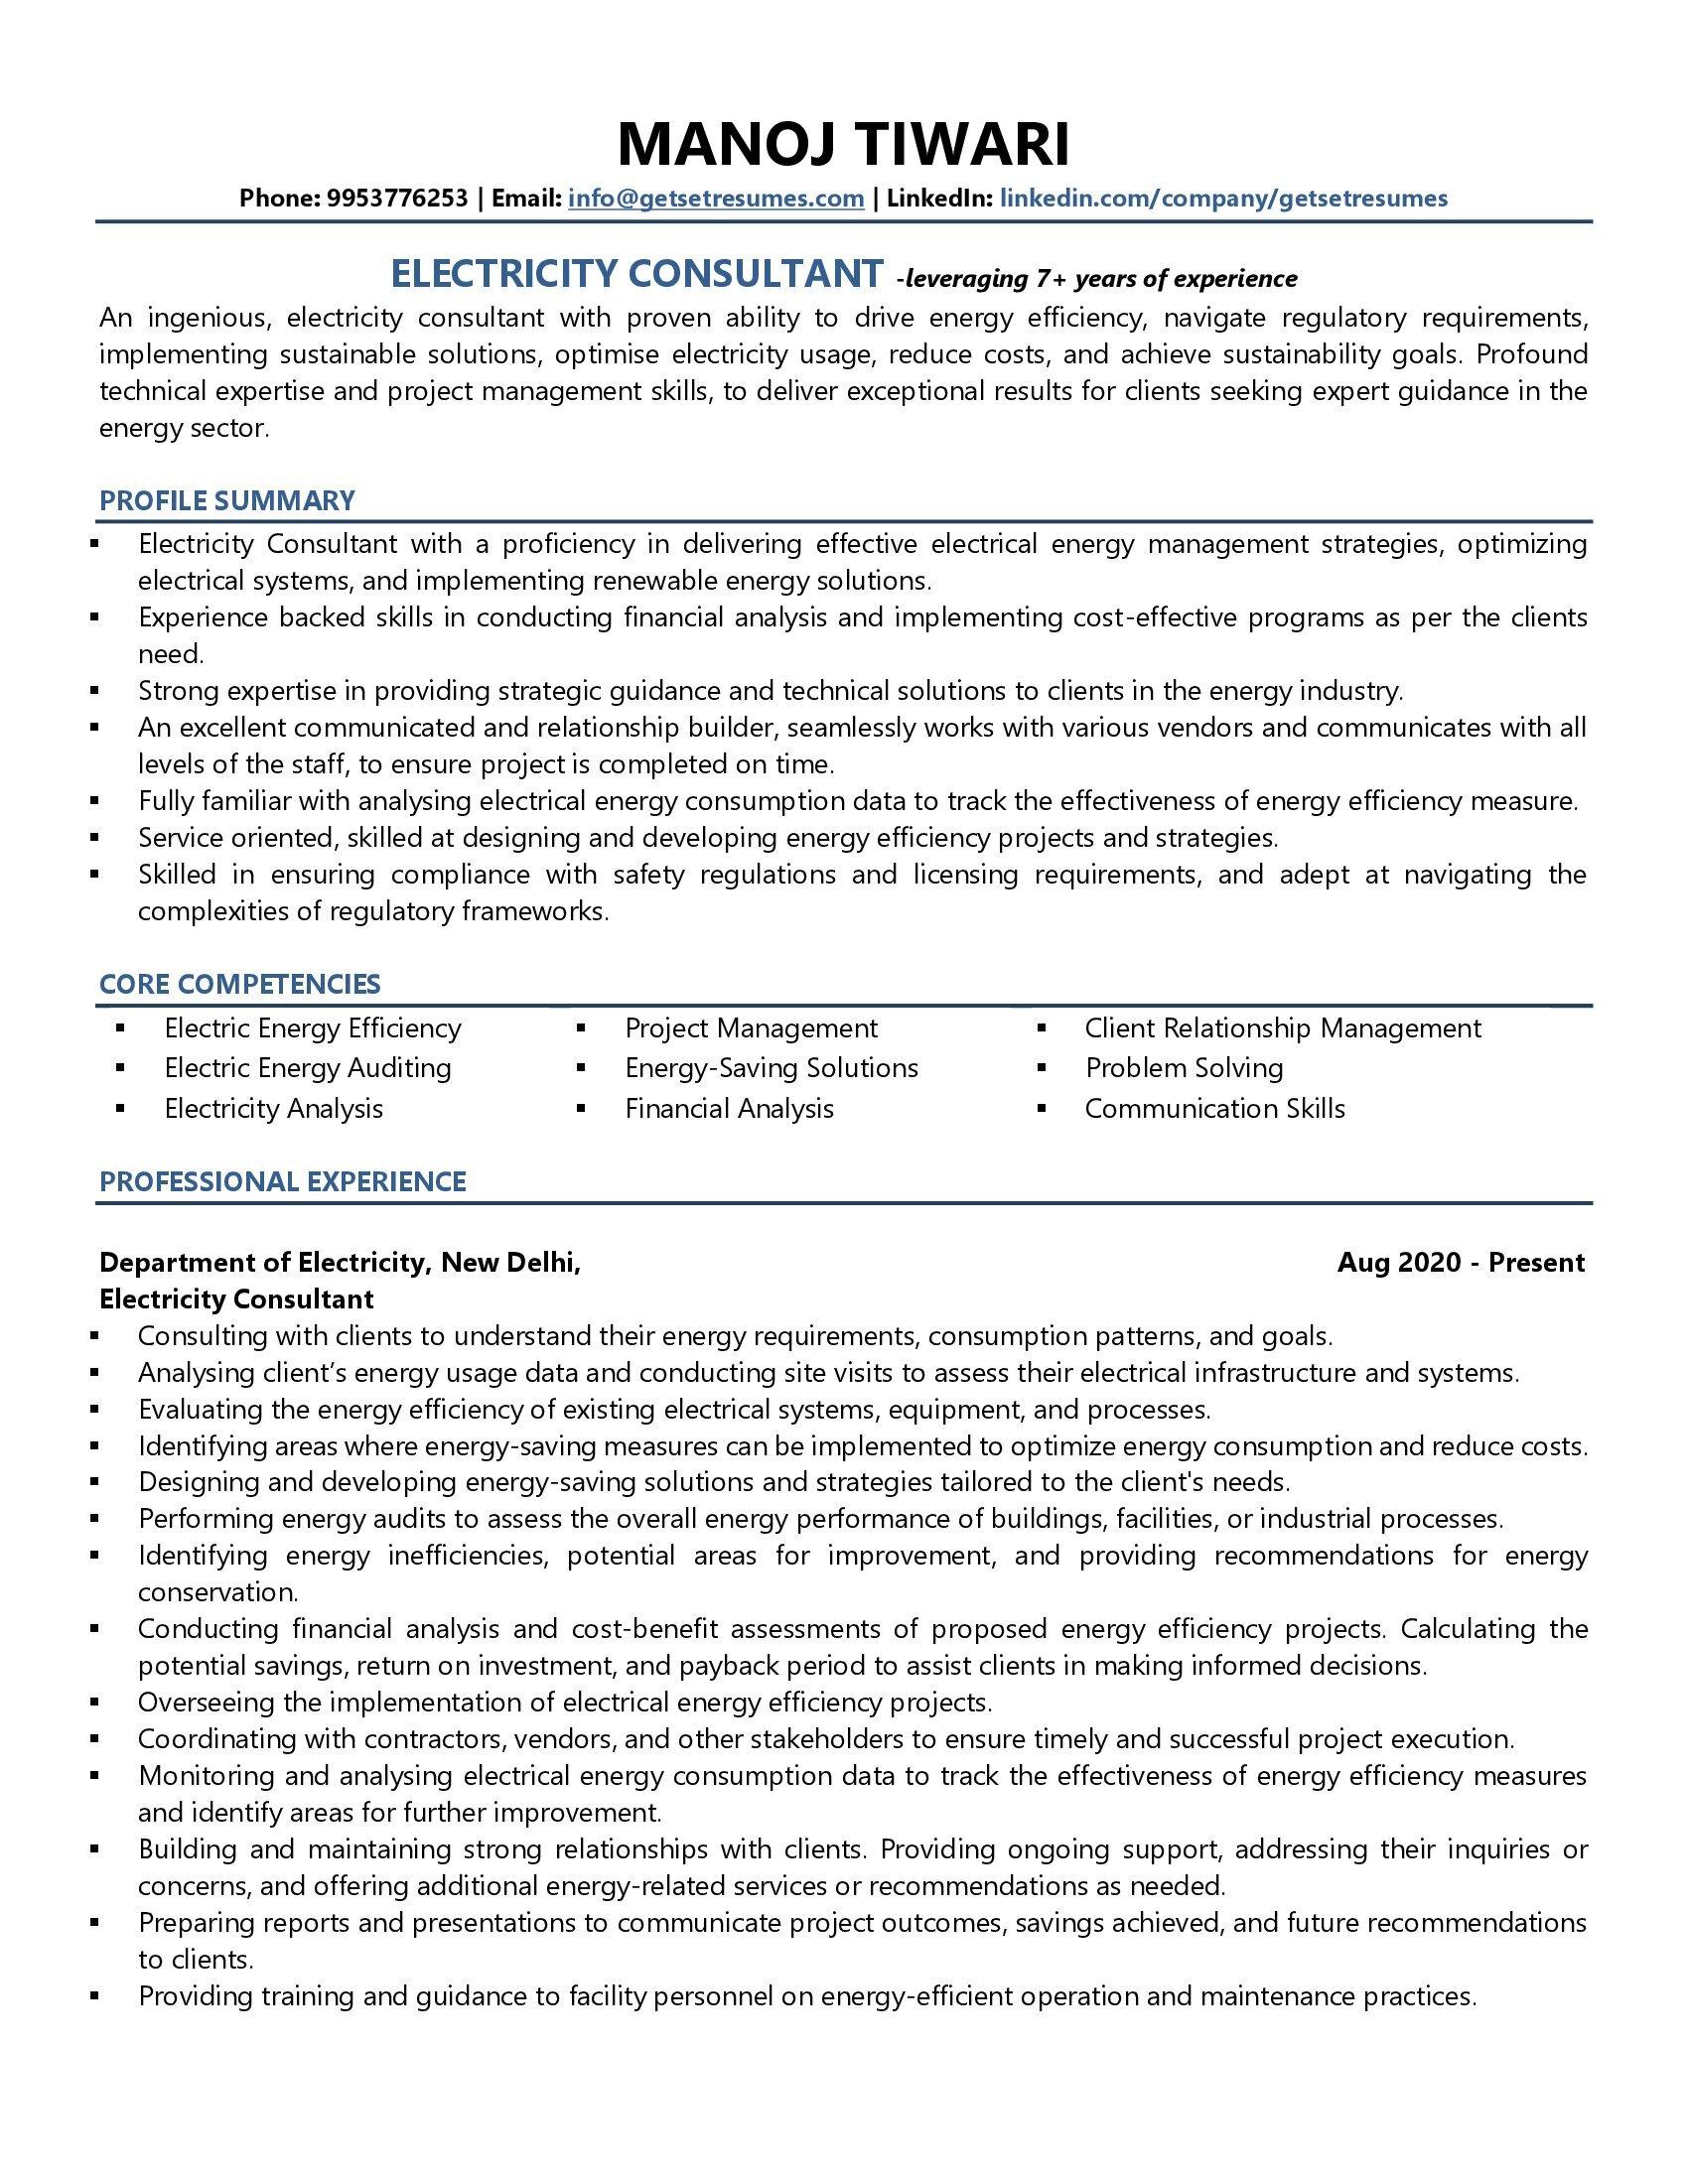 Electricity Consultant - Resume Example & Template